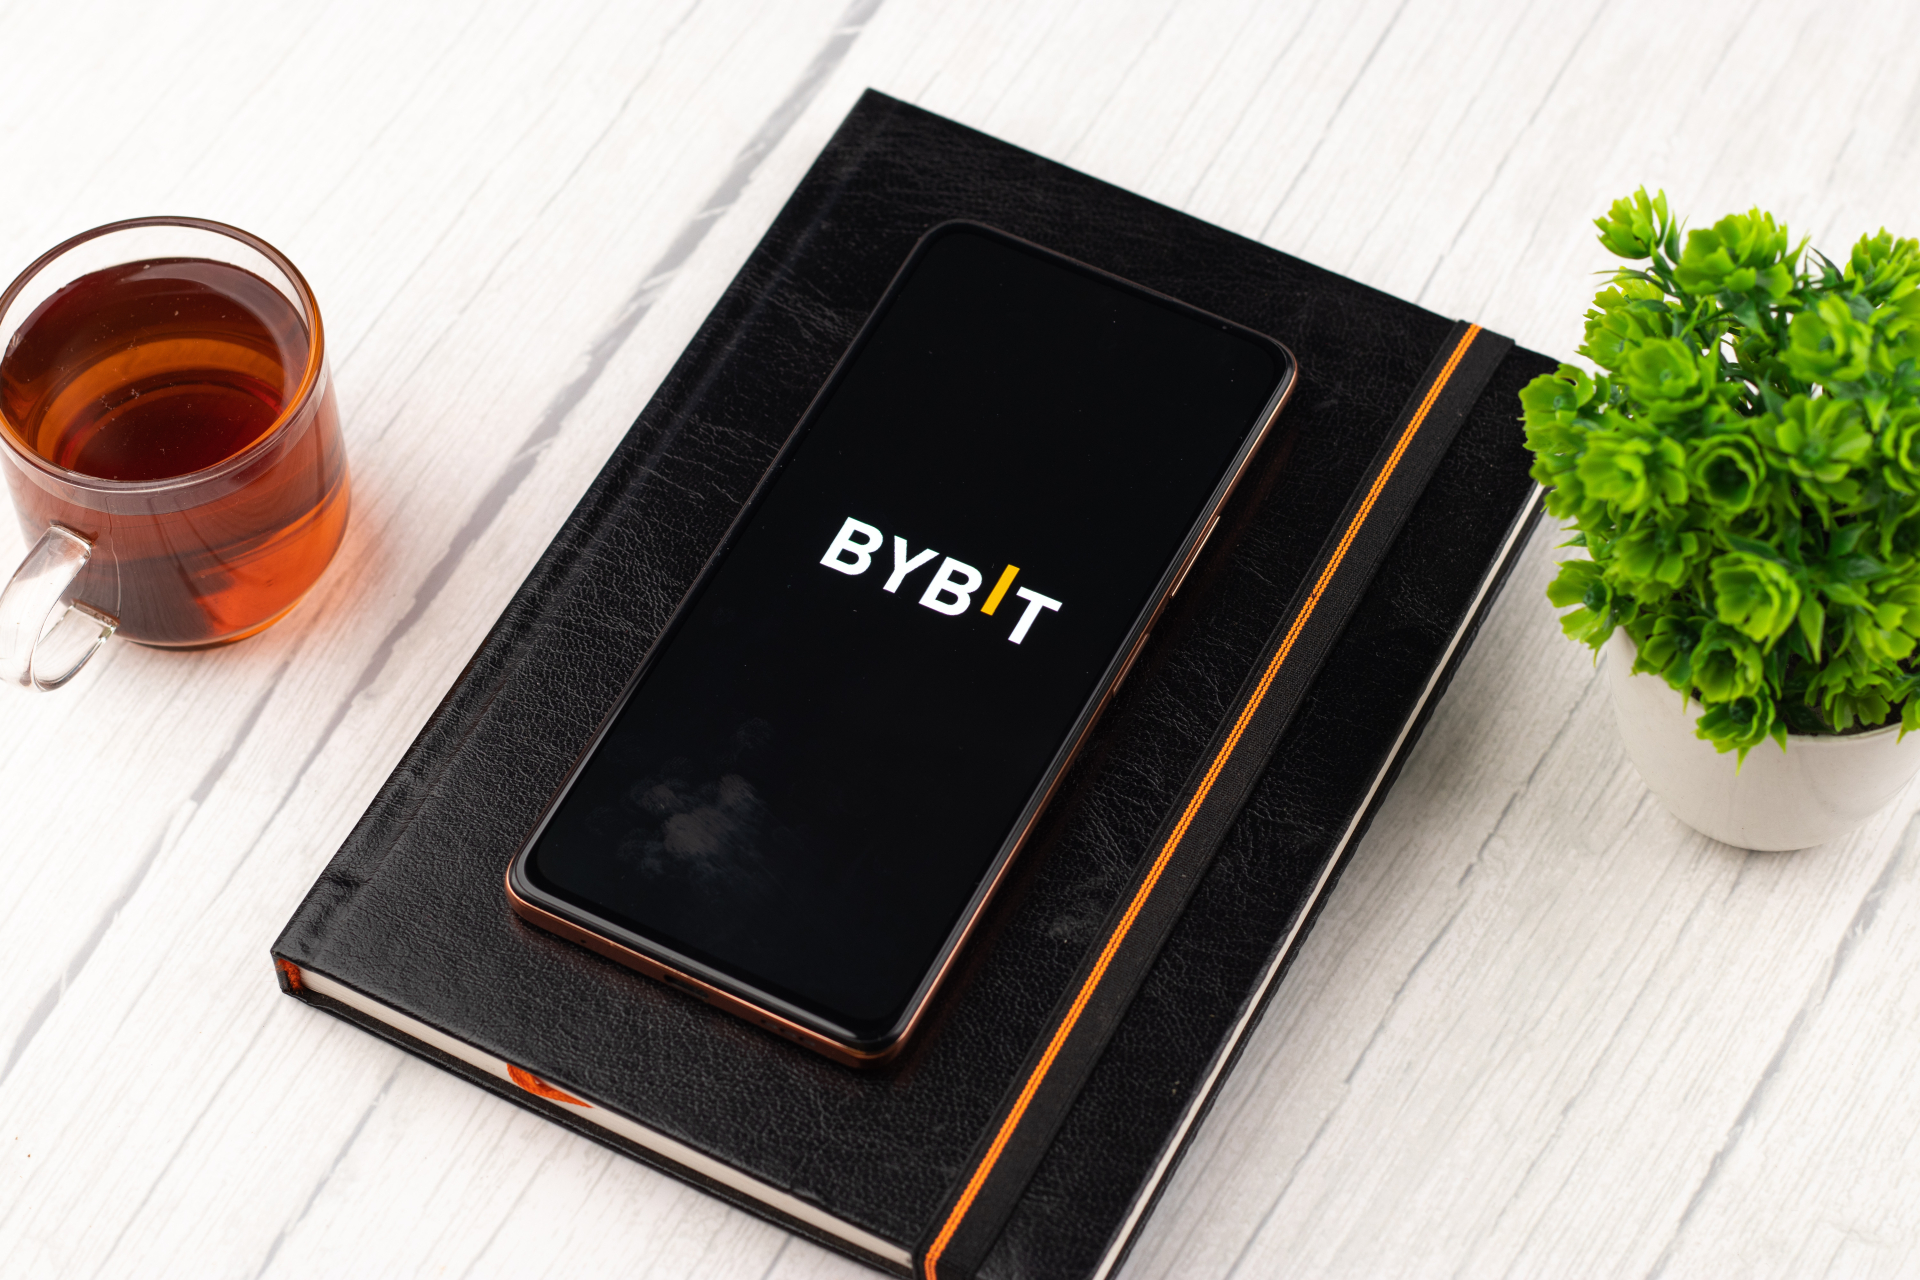 Bybit introduces Mastercard powered debit card
